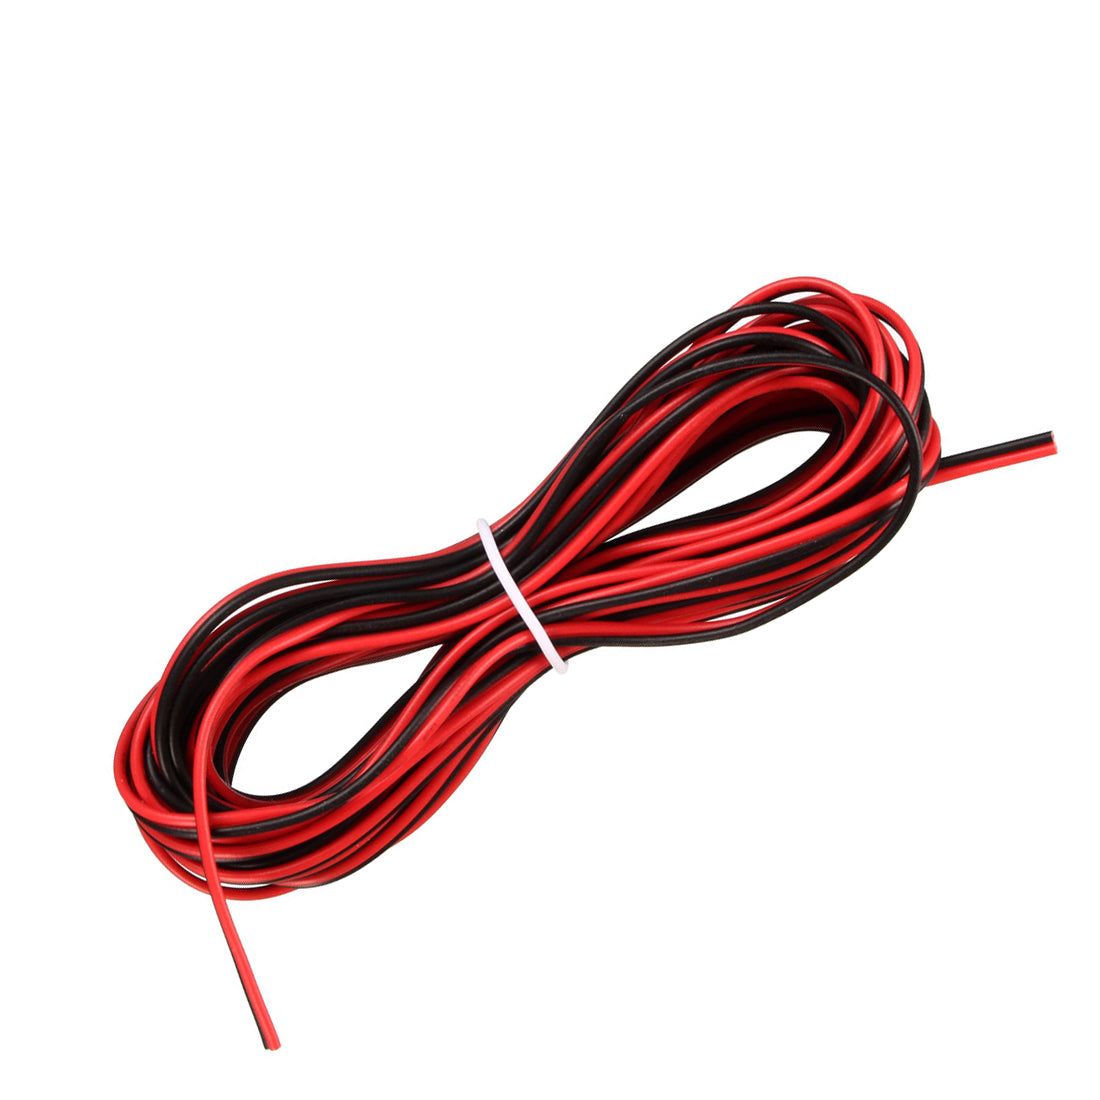 uxcell Uxcell Red Black Wire 2pin Extension Cable Cord 26 AWG Parallel Wire Tin Plated Copper 3 Meters Length for LED Strip Light